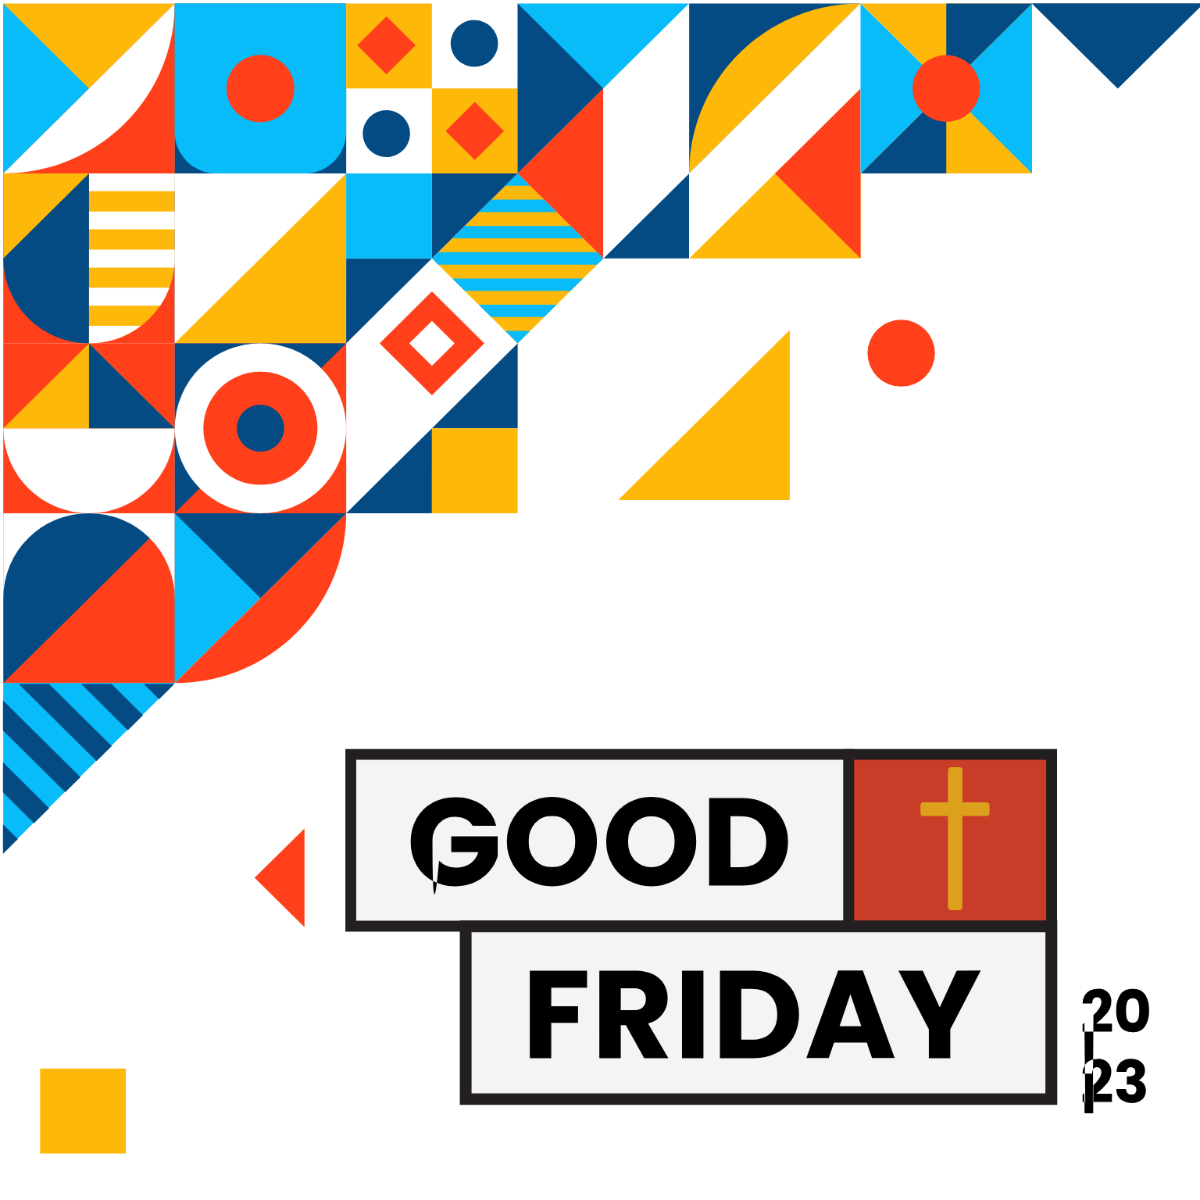 Good Friday Event Vector Template